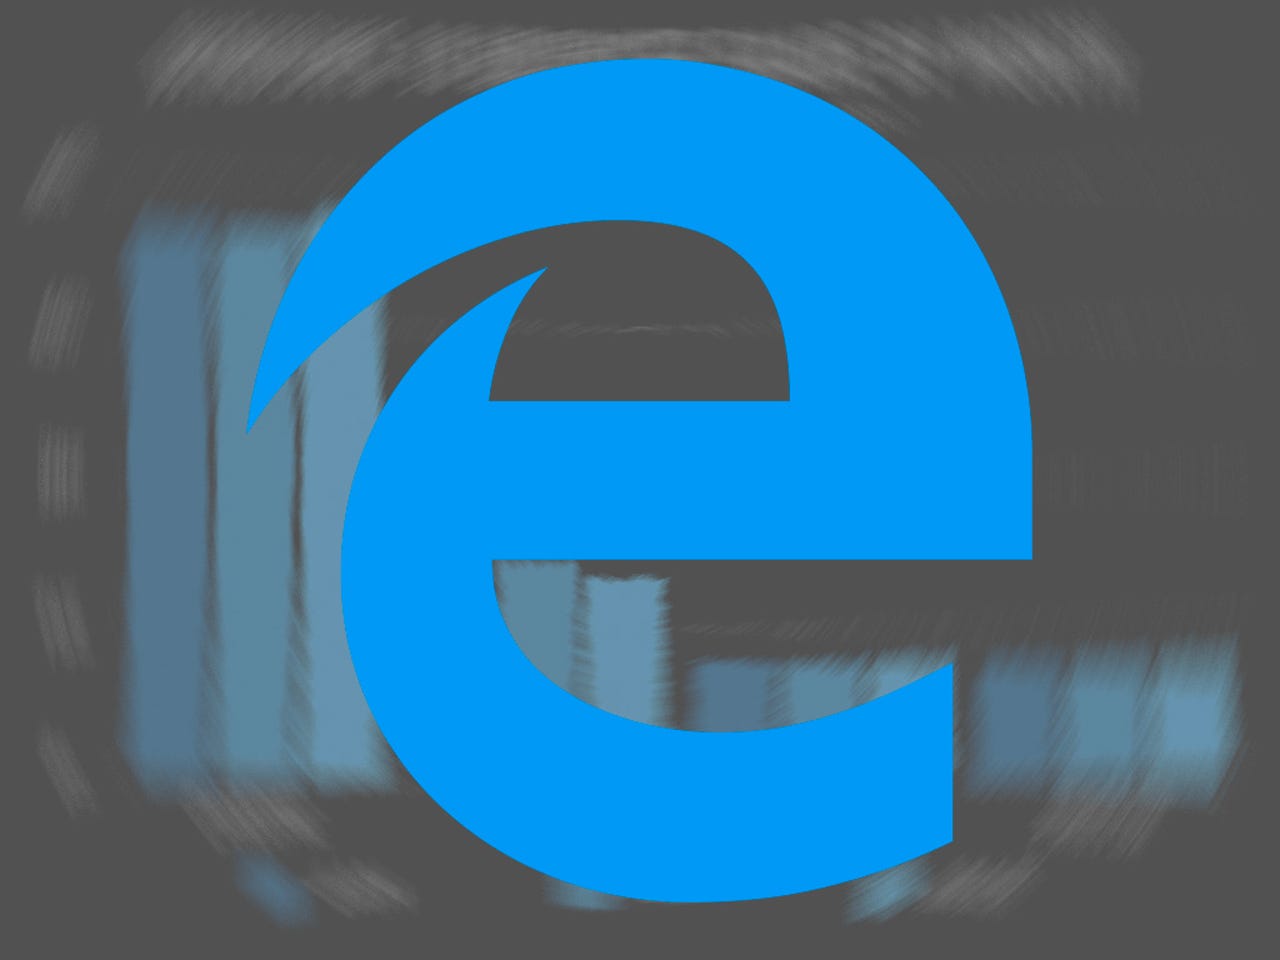 Does anyone actually use (or even know about) Microsoft's Edge